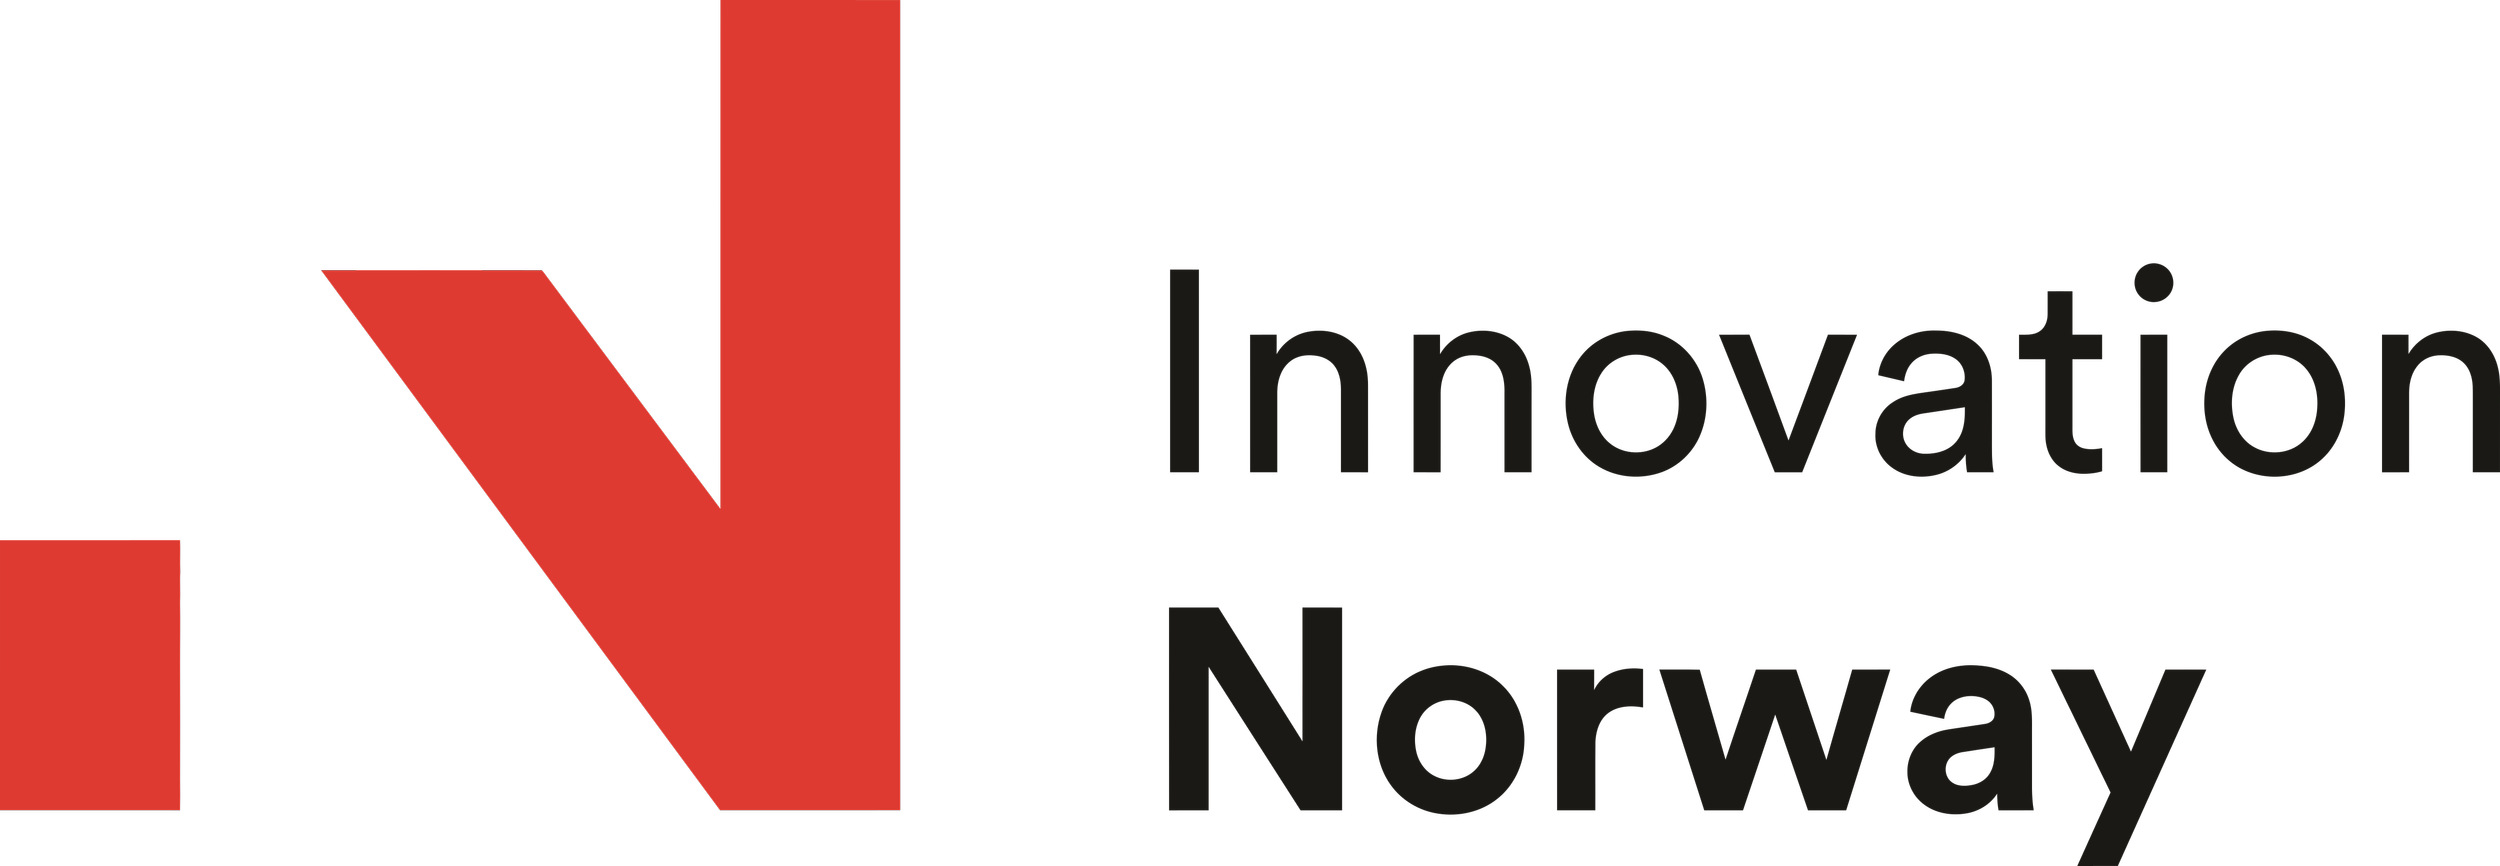 Innovation_Norway_Logo.png